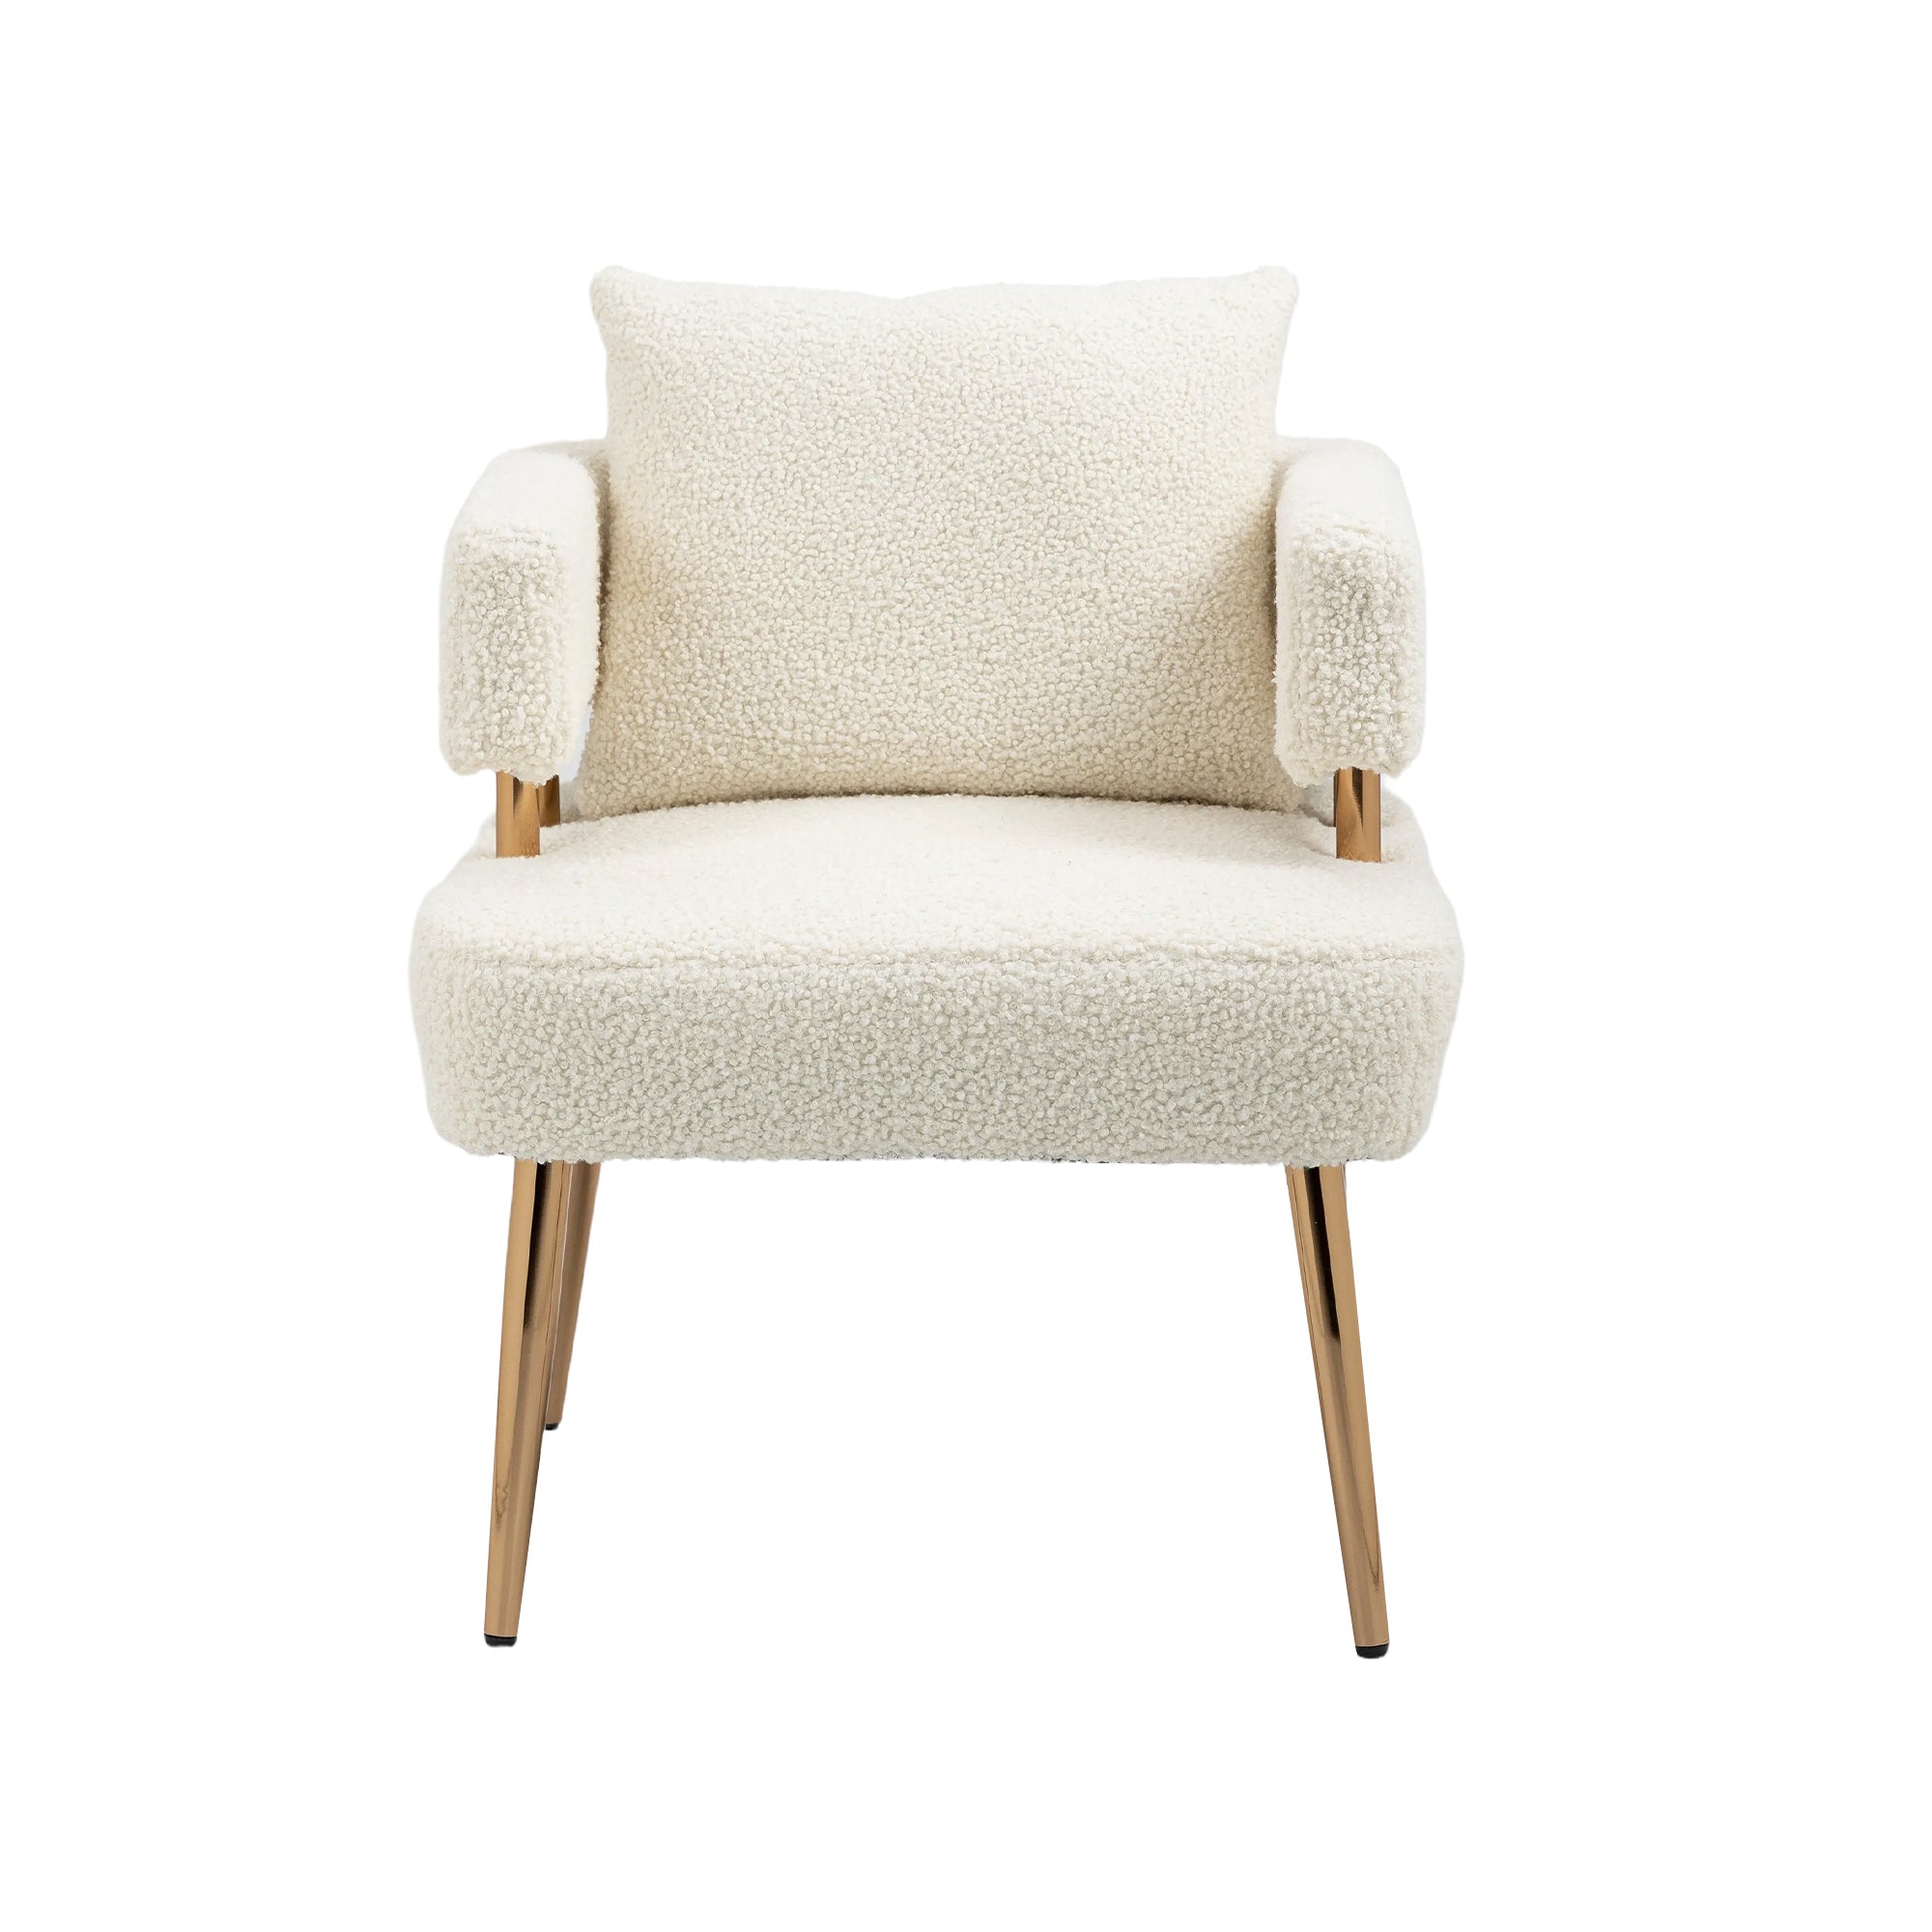 Accent Chair with Golden Feet - White Teddy